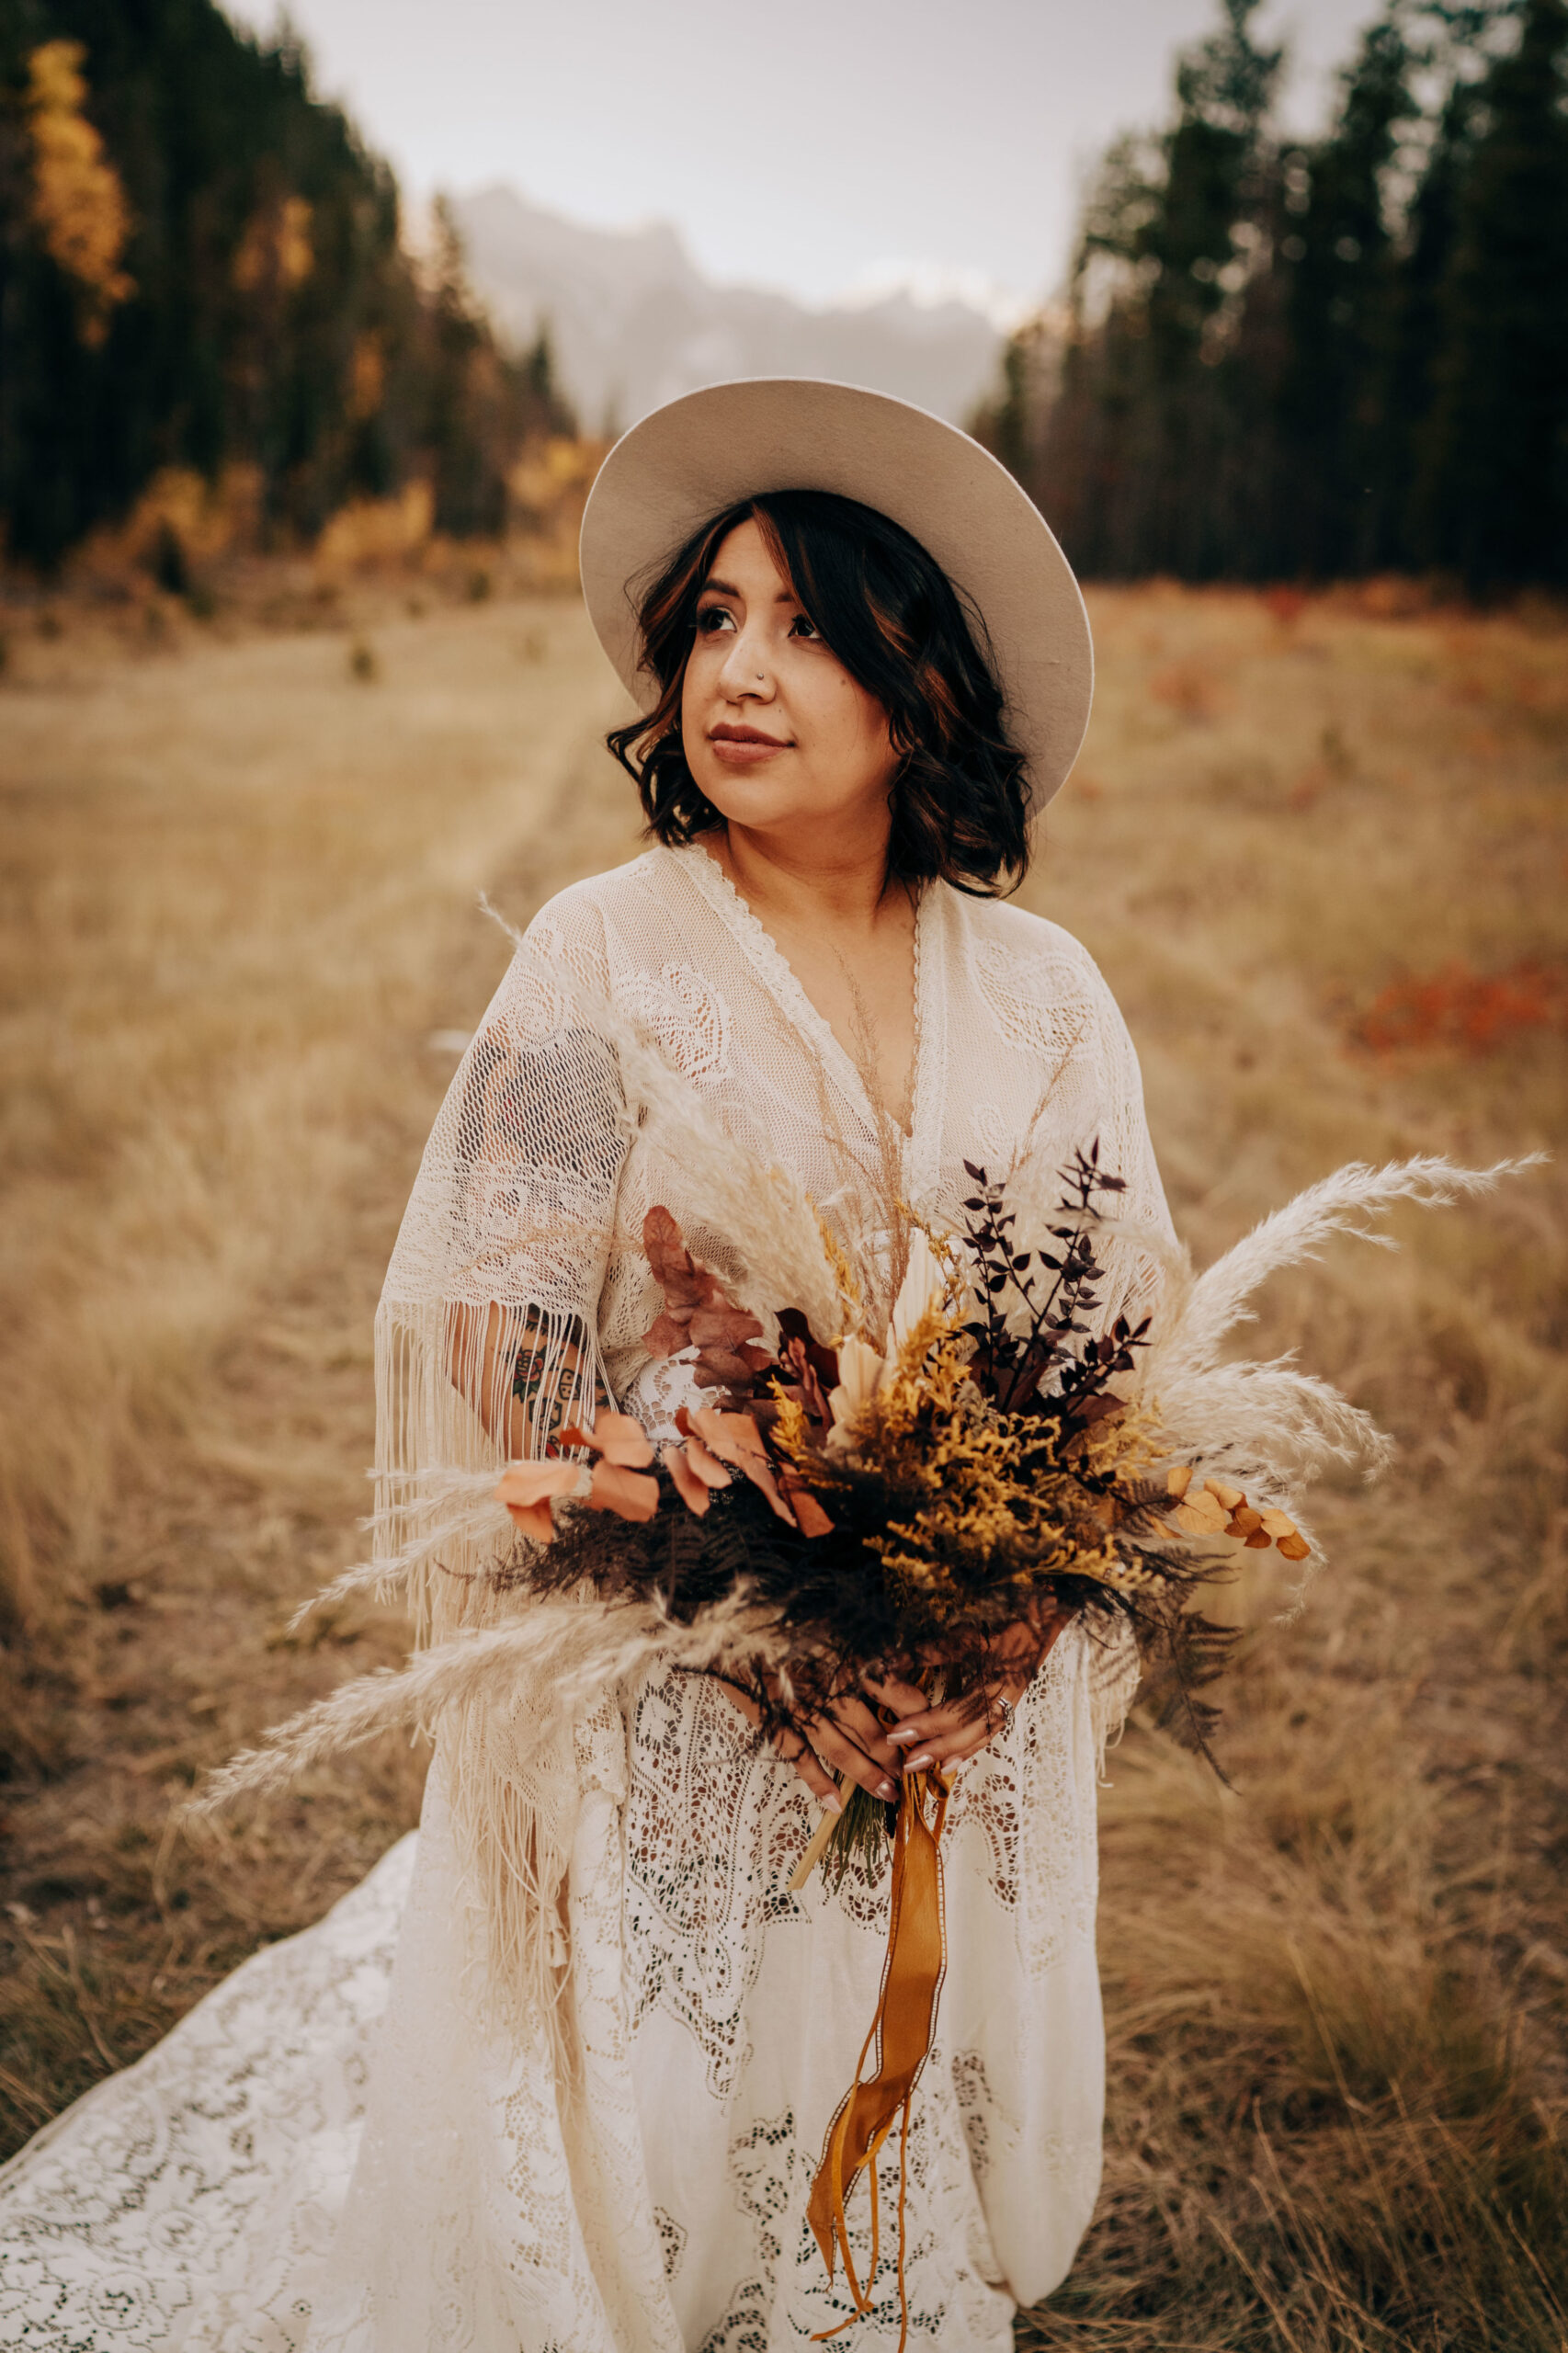 Boho bride in maternity lace boho wedding gown and hat standing in a valley bolding bouquet of neutrals and brown with